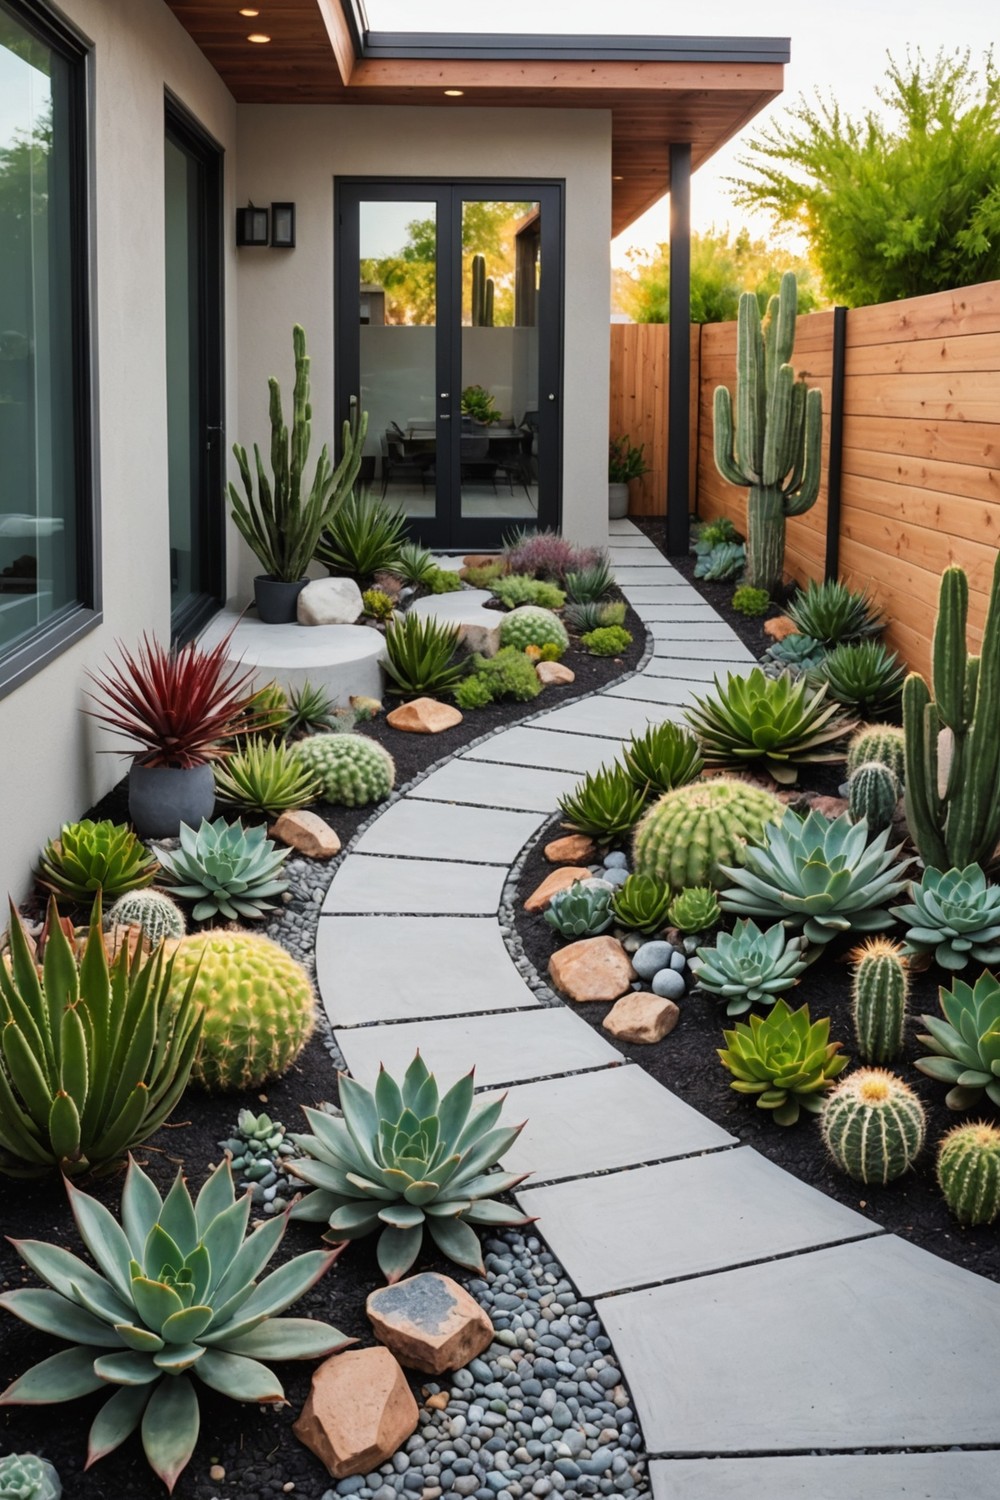 Using Succulents and Cacti for a Low-Maintenance and Modern Look